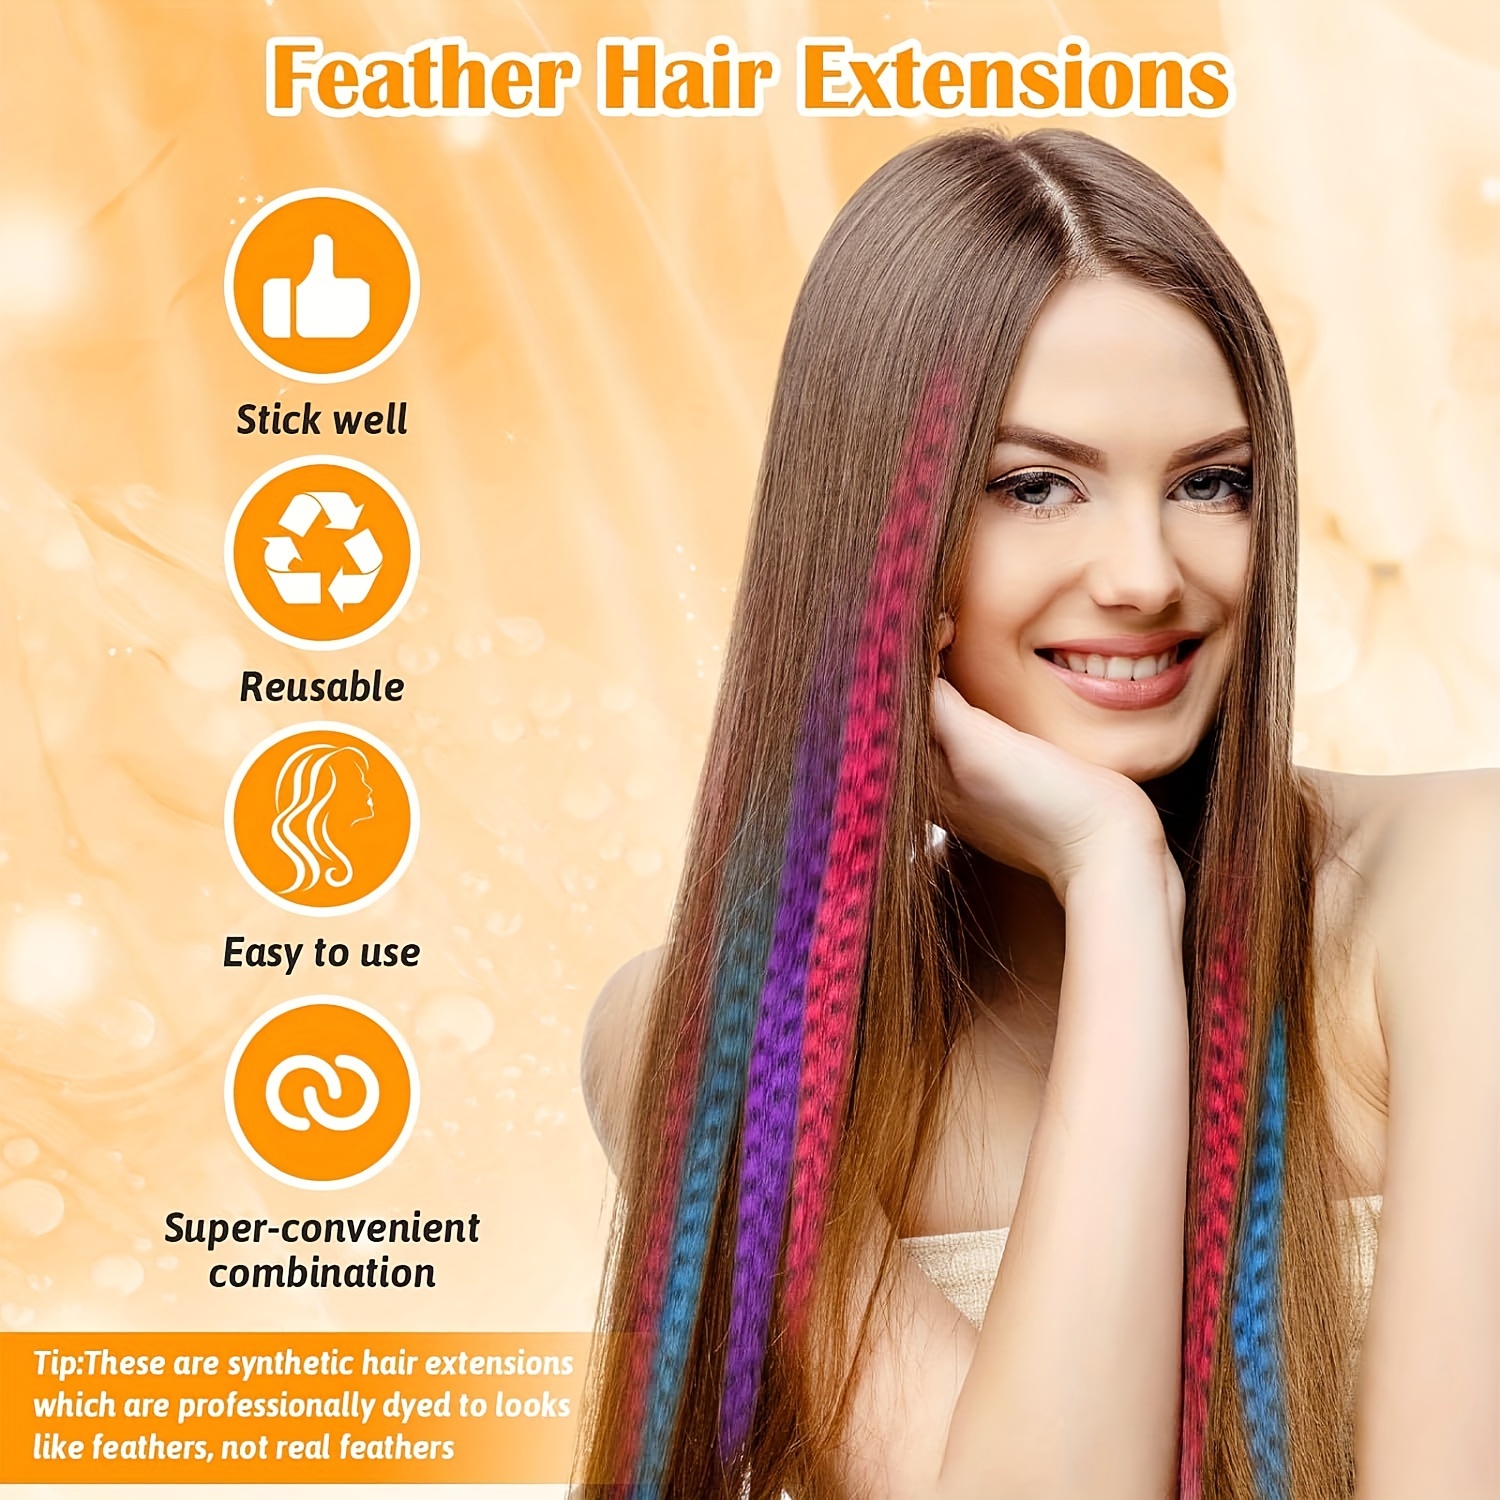 40 Strands Feather Hair Extensions 10 Colors 16 Inch 40 Strands Hair  Feathers Mixed Colors Colored Synthetic Hair Feathers Extensions Kit